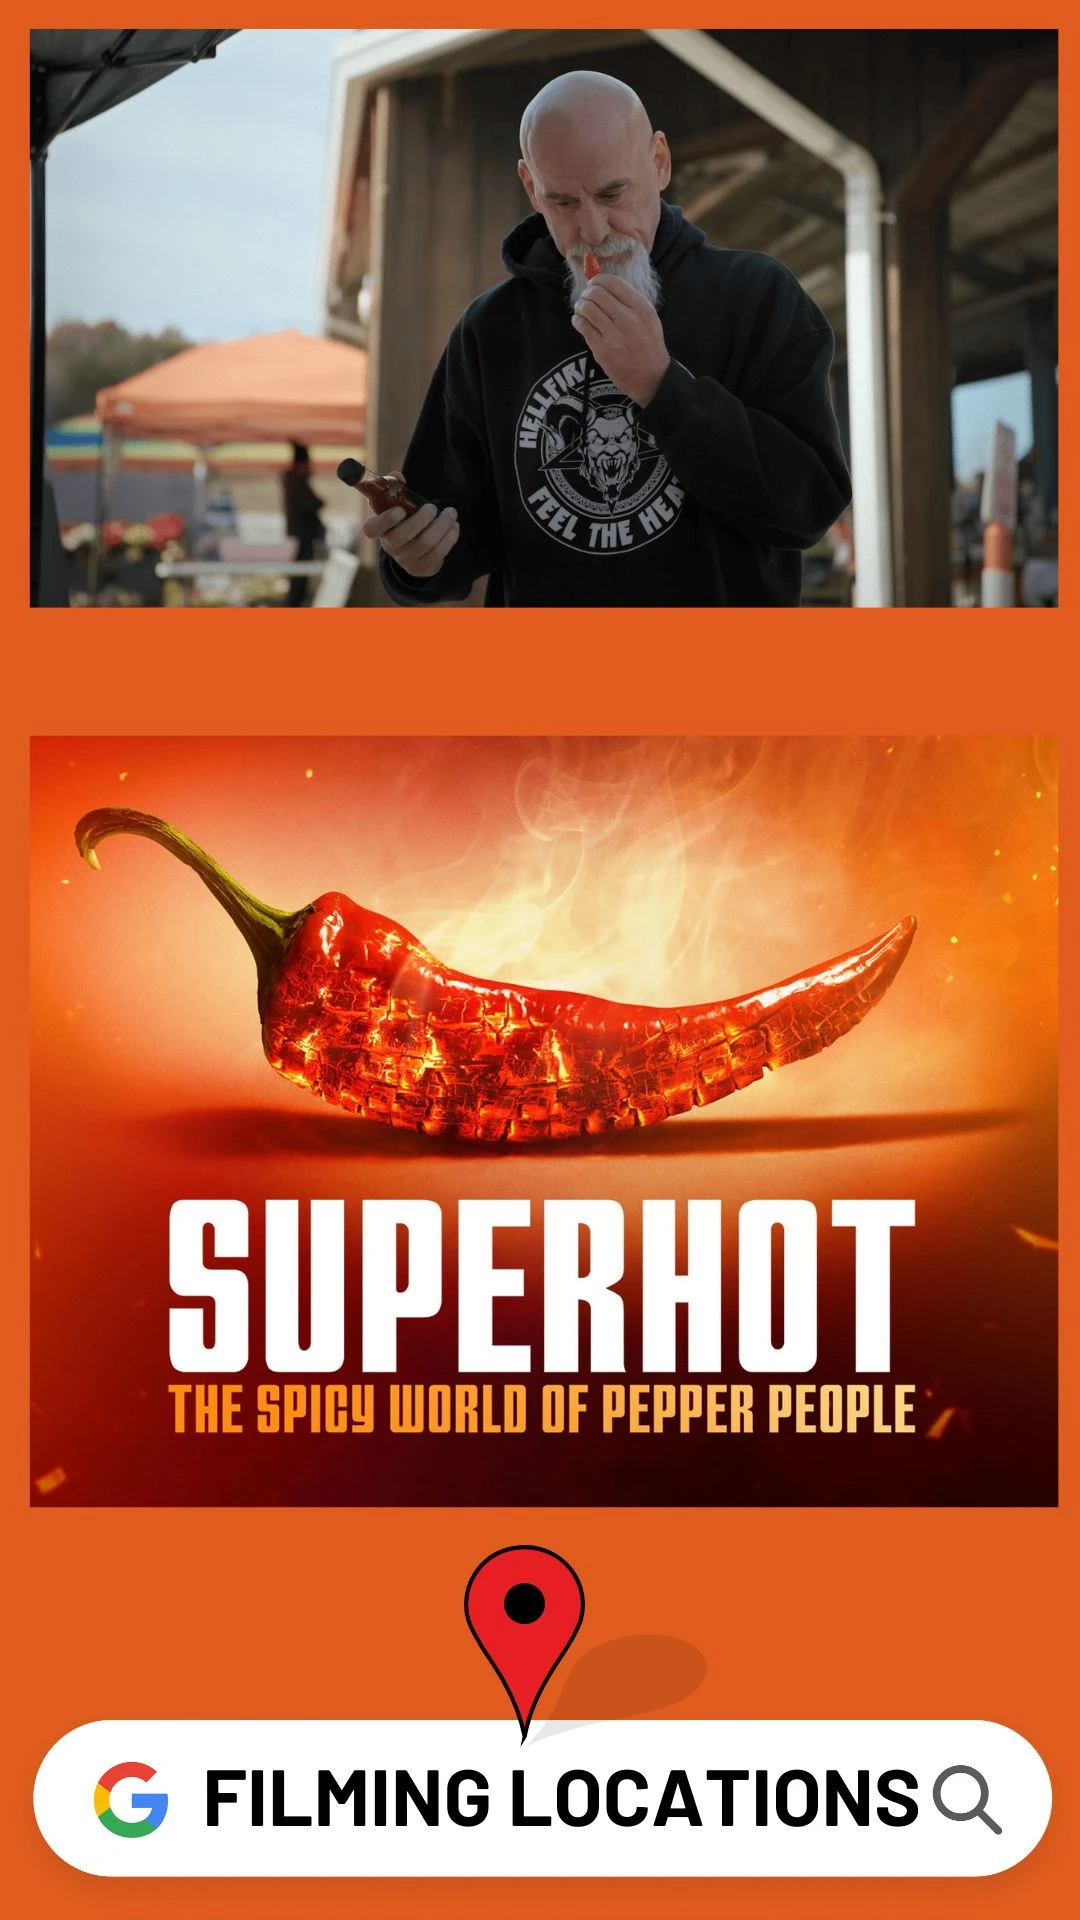 Superhot The Spicy World of Pepper People Filming Locations